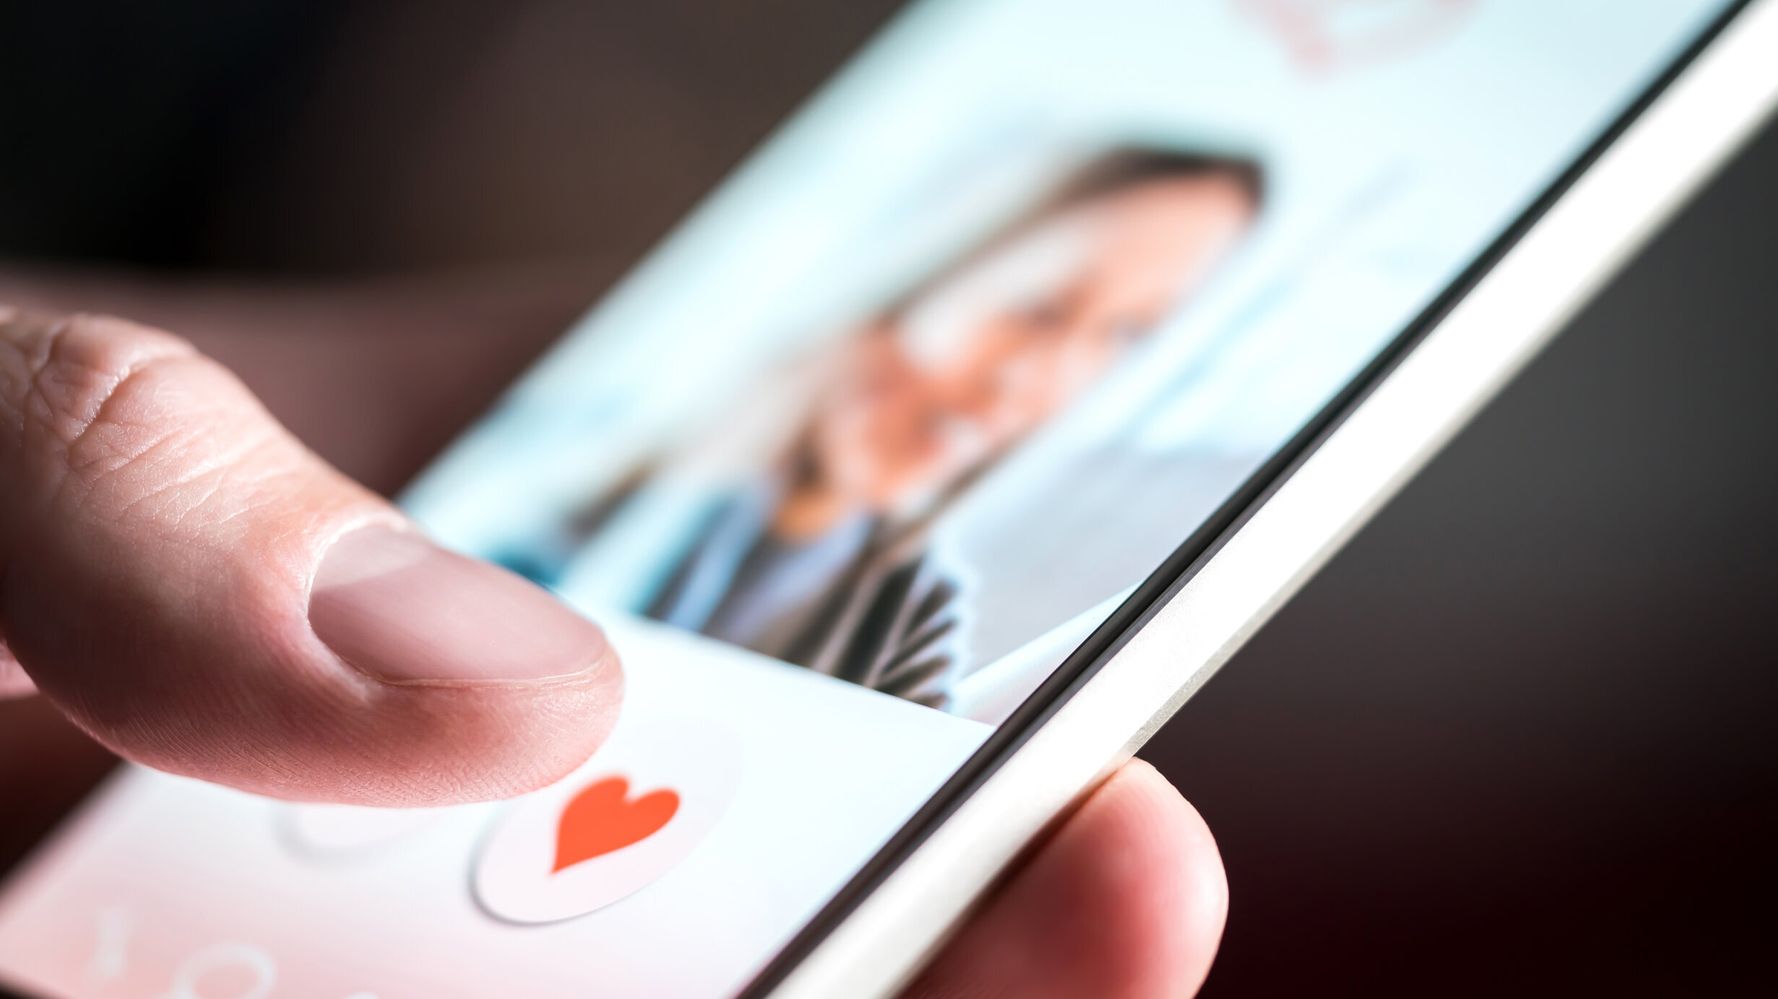 Fwb App: Top Dating Apps for Friends with Benefits